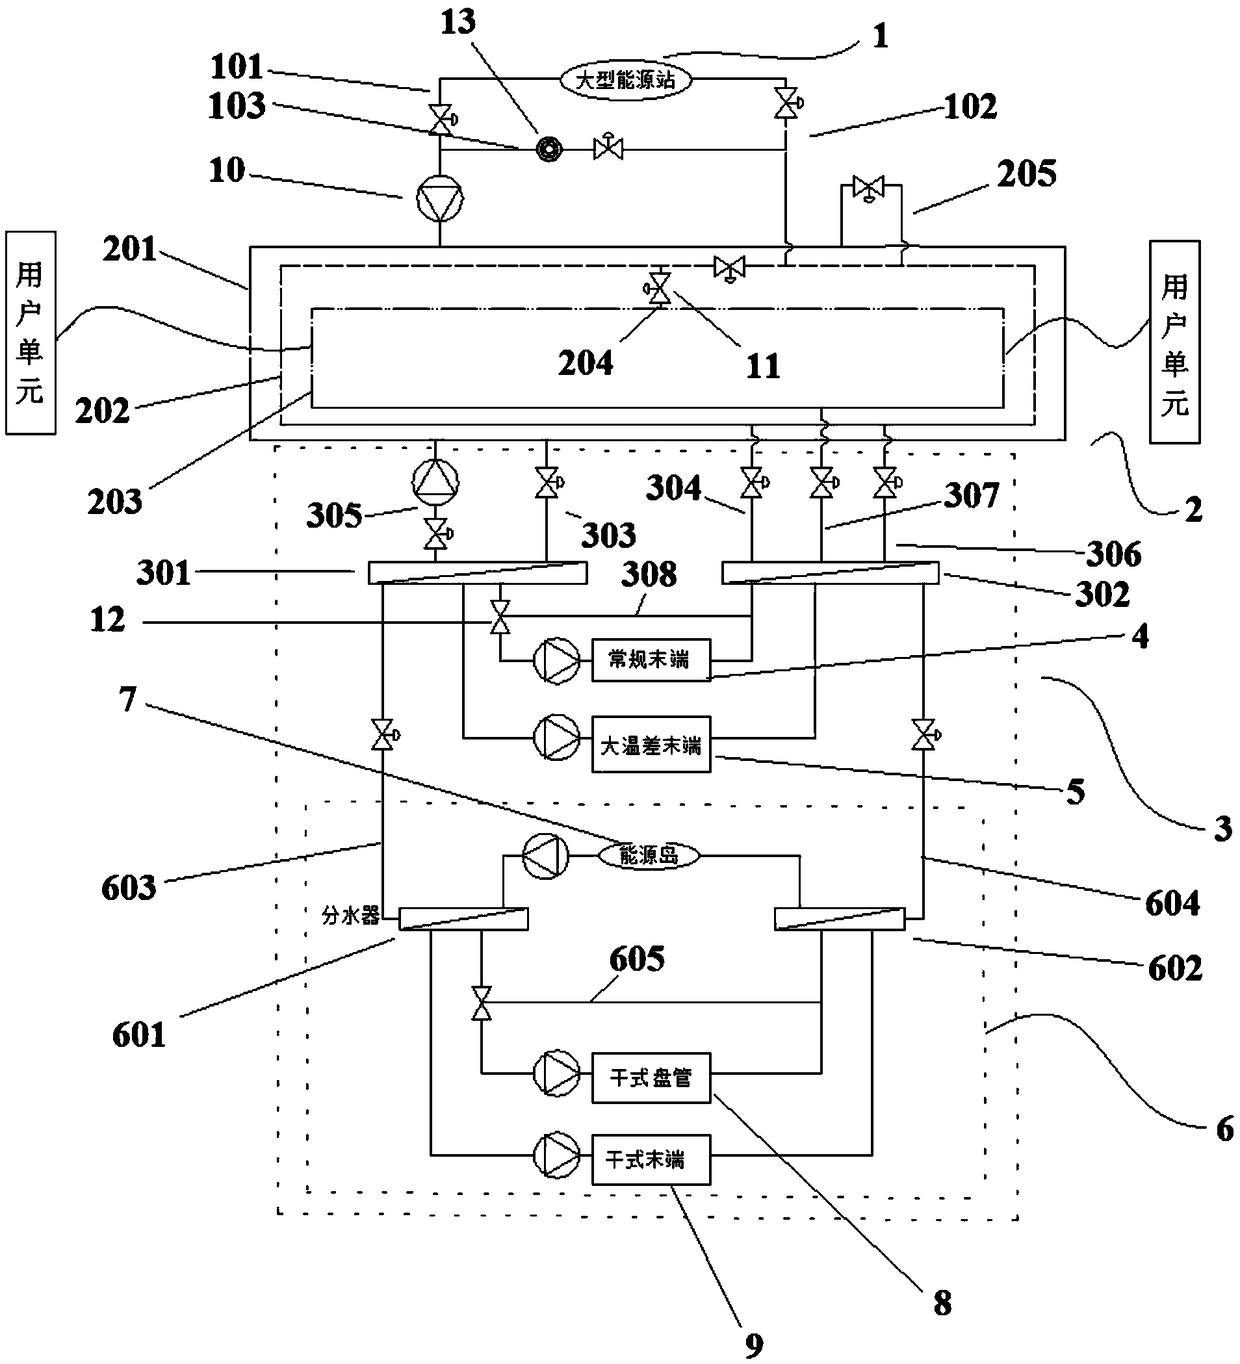 Large centralized air-conditioning system with distributed cold and heat sources